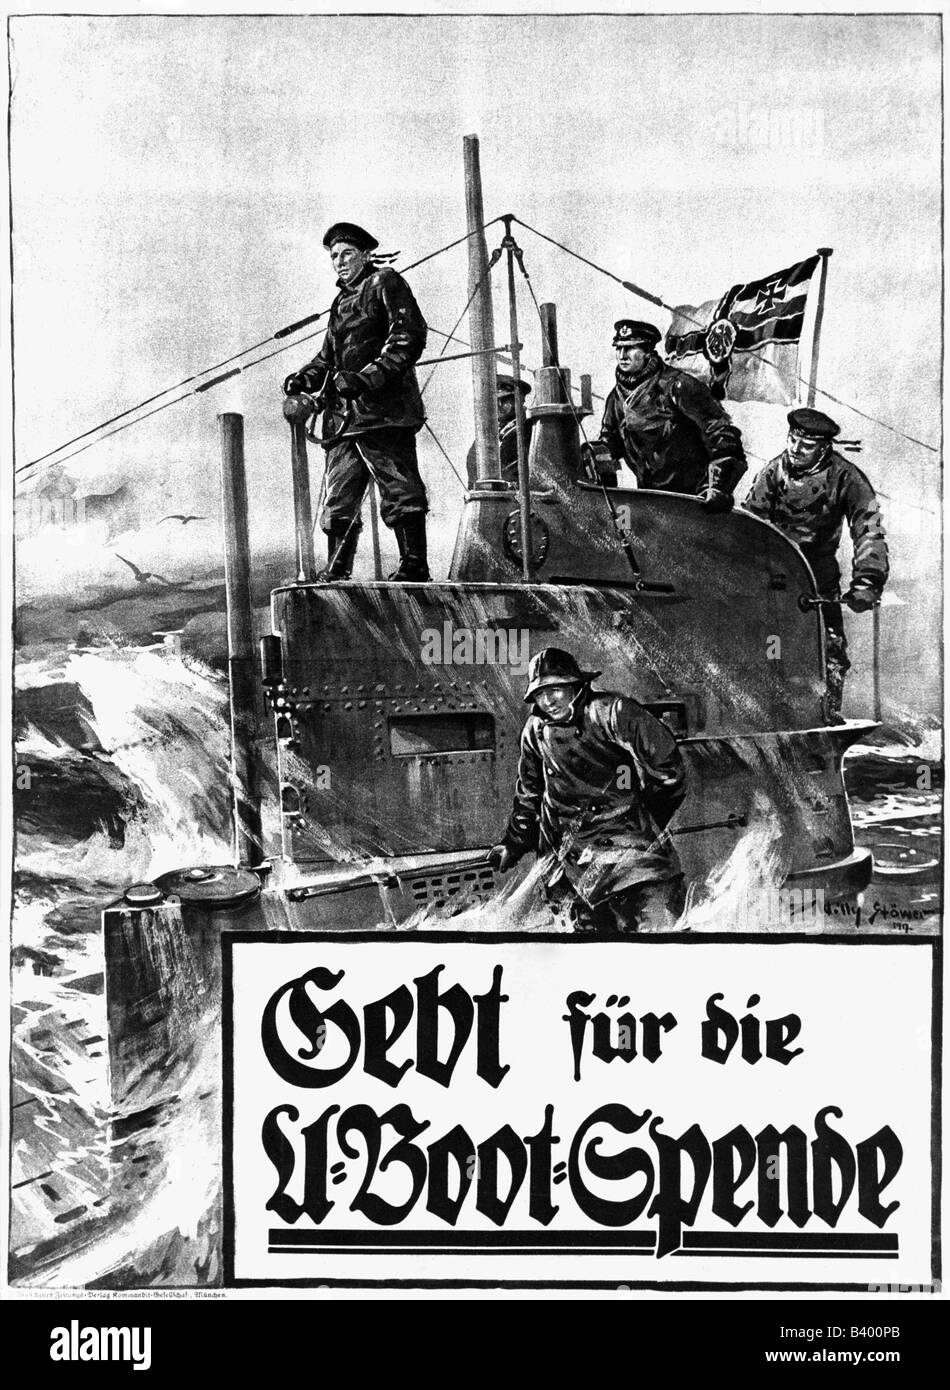 events, First World War / WWI, propaganda, poster 'Gebt fuer die U-Boot-Spende' (Give money for the submarine donation), after a painting by Willy Stoewer (1864 - 1931), Germany, 1917, Stock Photo